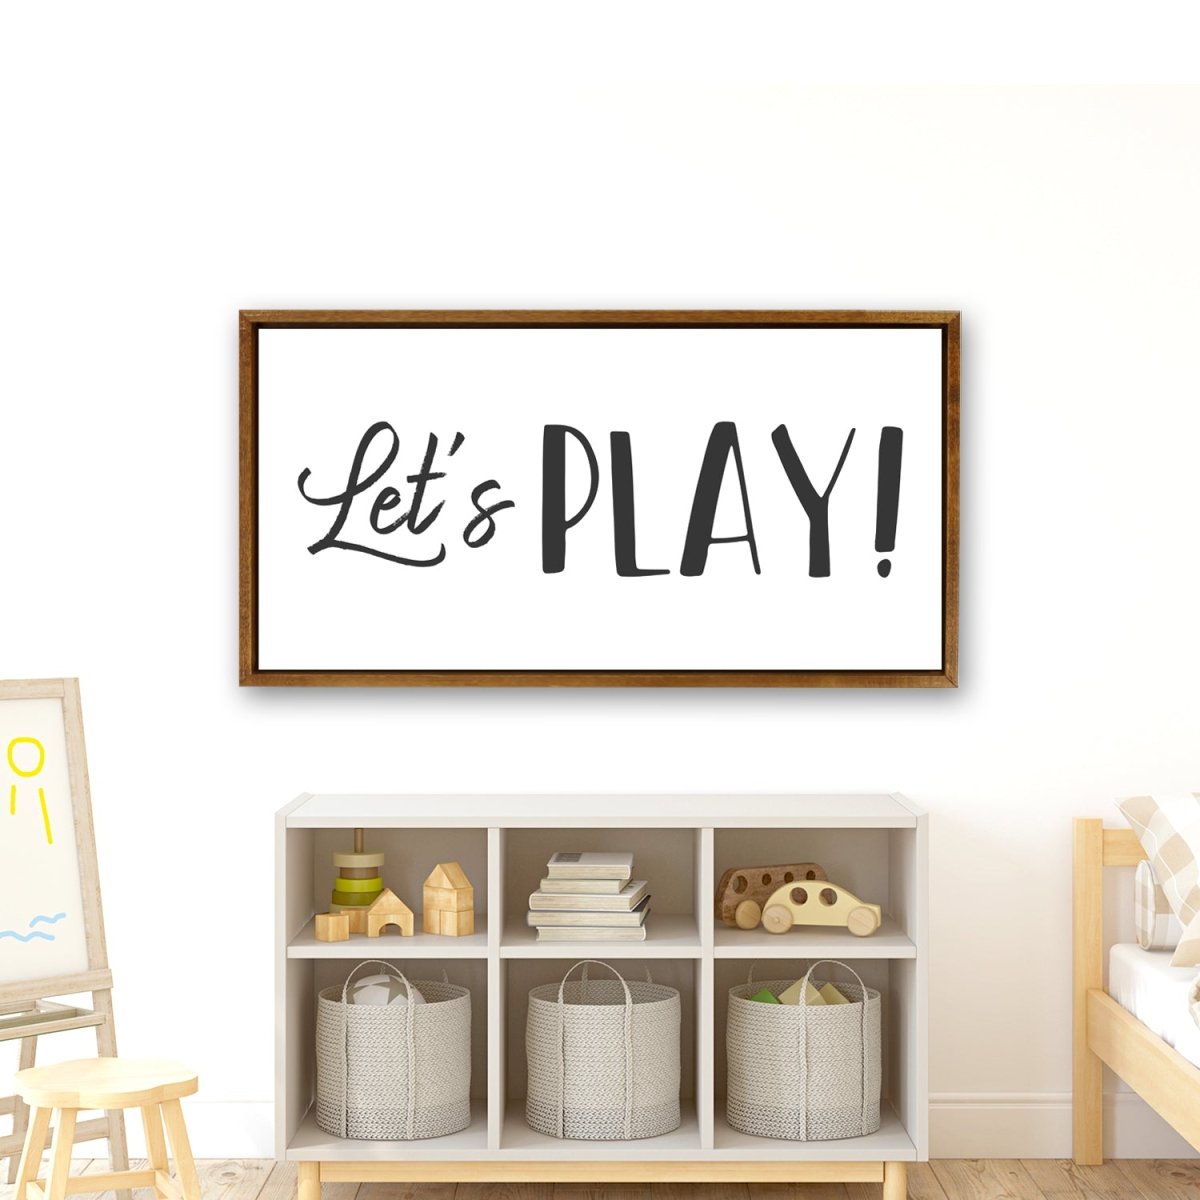 Let's Play Canvas Sign in Nursery Above Play Area - Pretty Perfect Studio